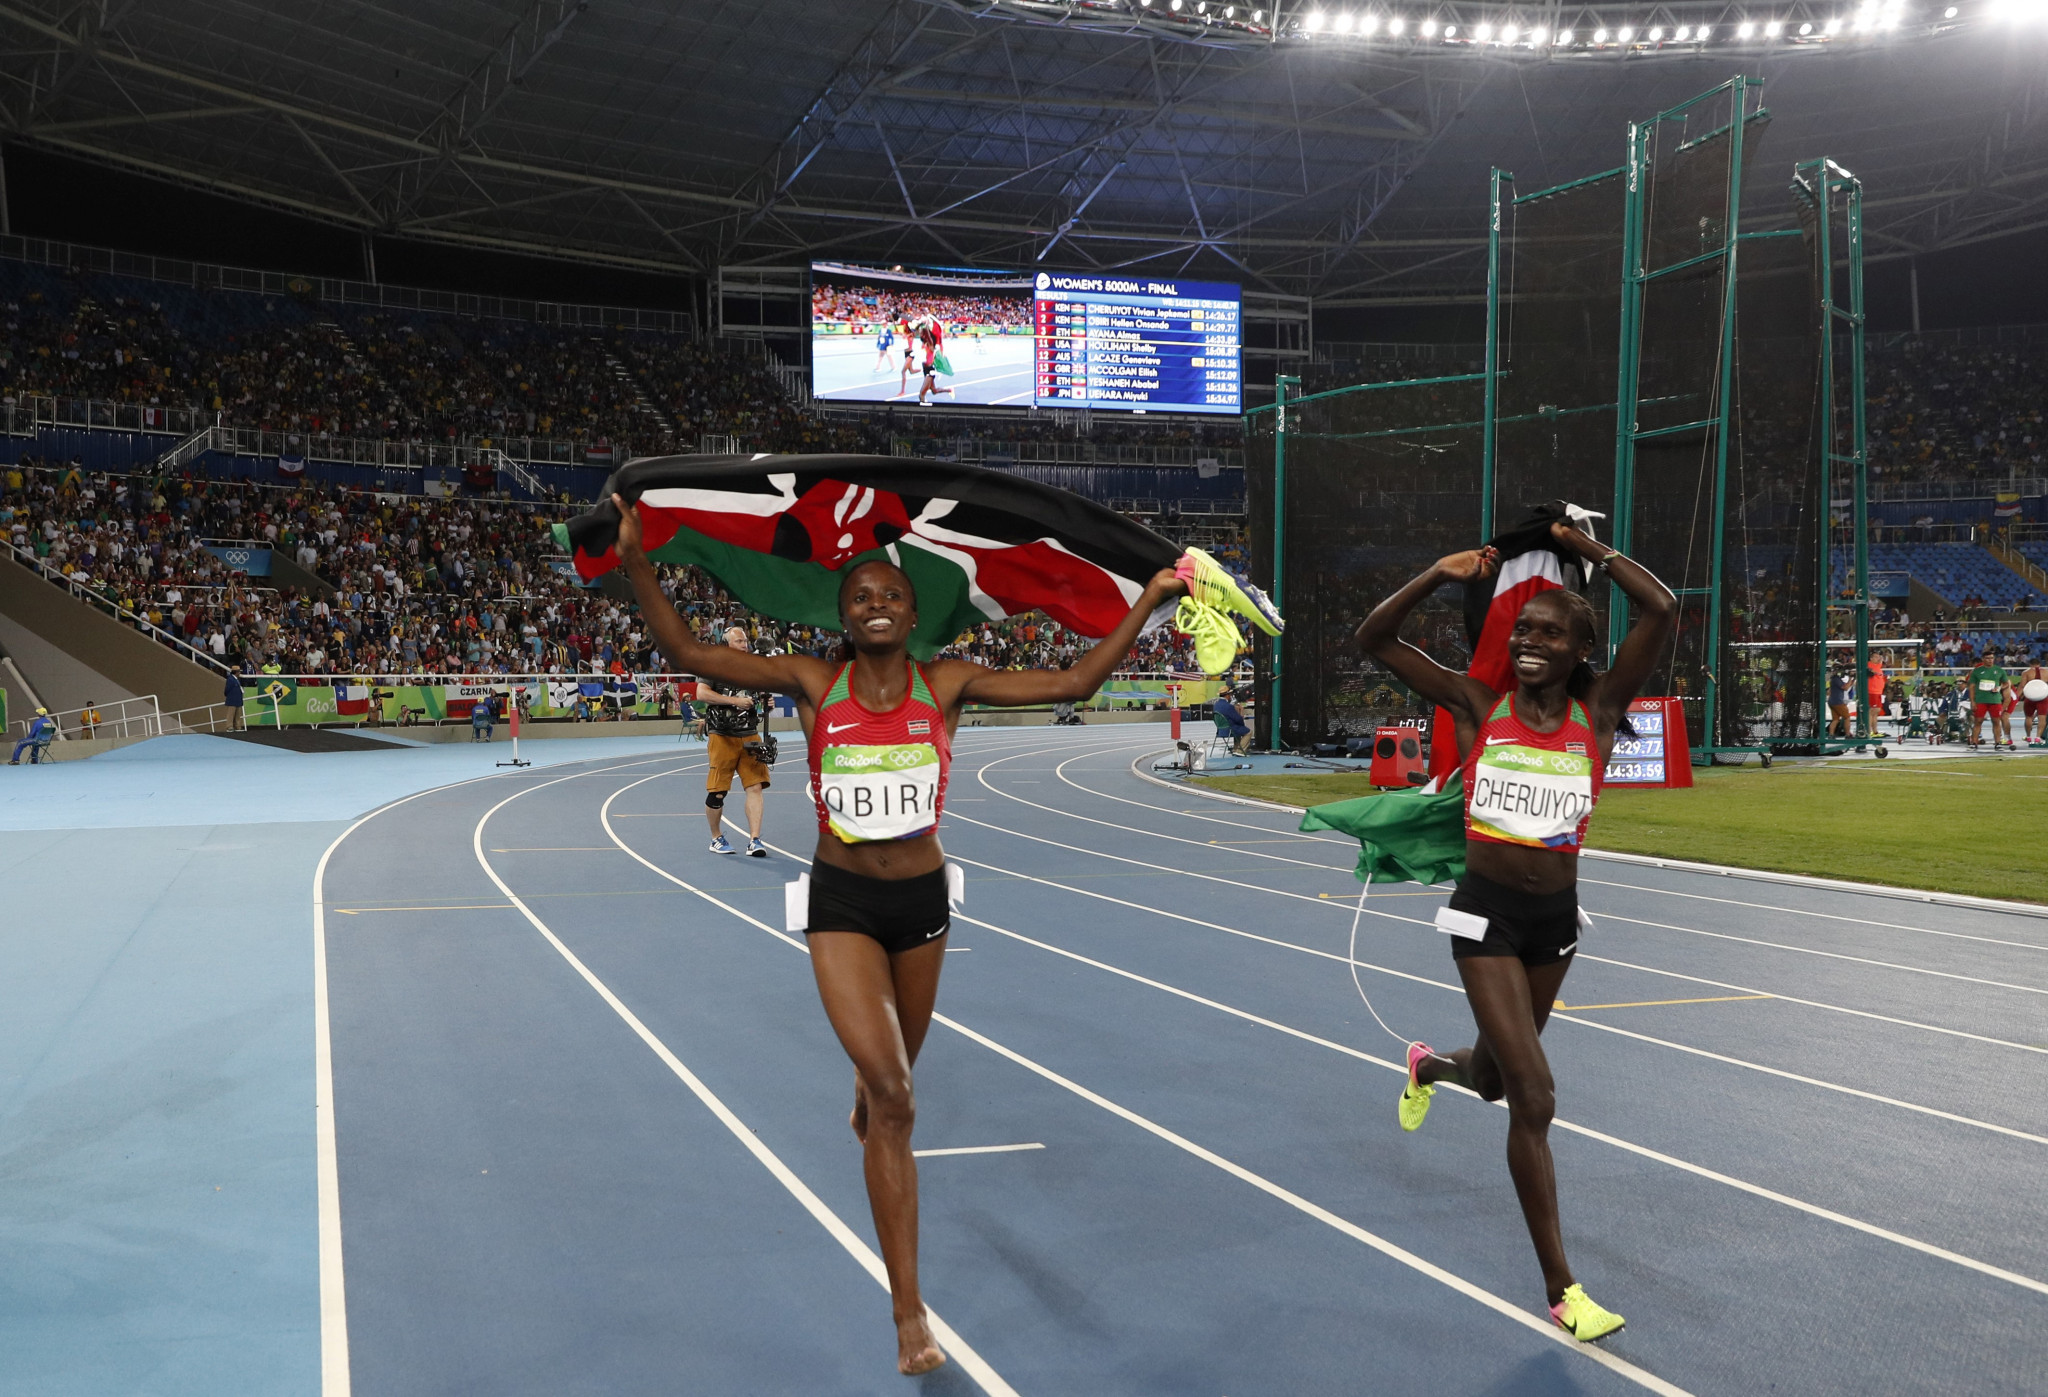 One of Kenya's highlights from Rio 2016 was their one-two in the women's 5,000 metres - with Hellen Obiri, left, taking silver and Vivian Cheruiyot taking gold ©Getty Images